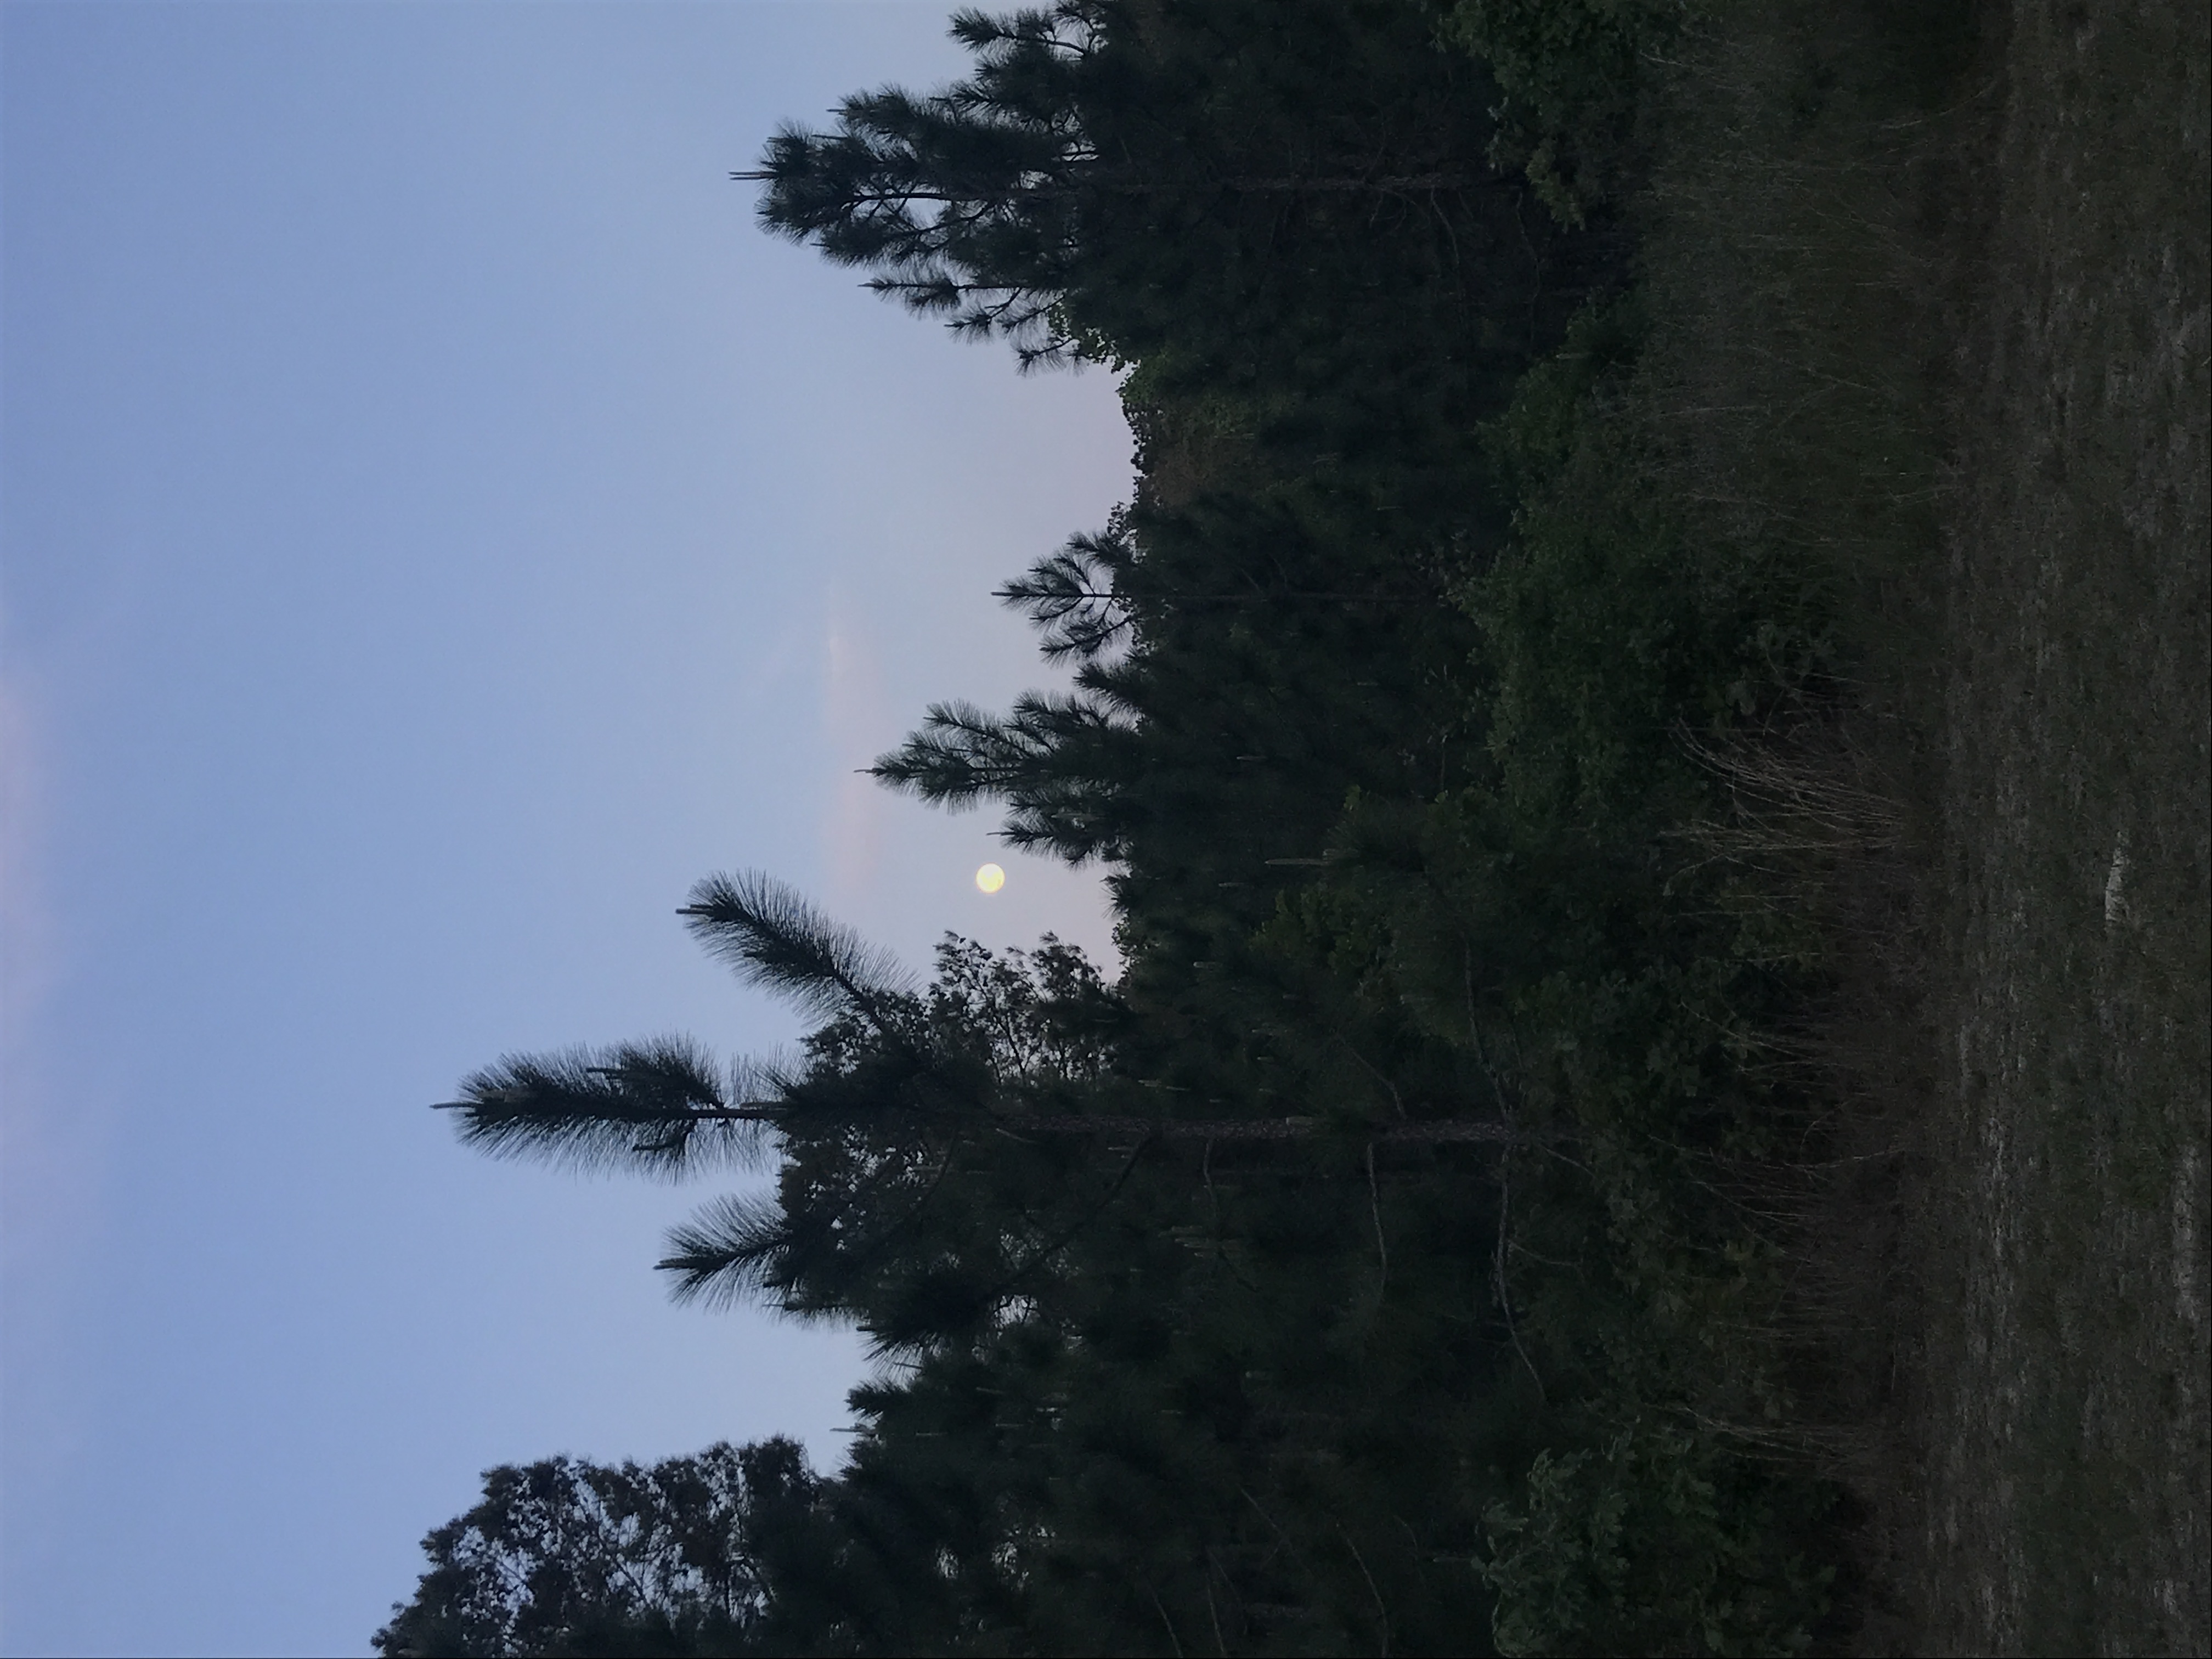 The moon rises over some trees.